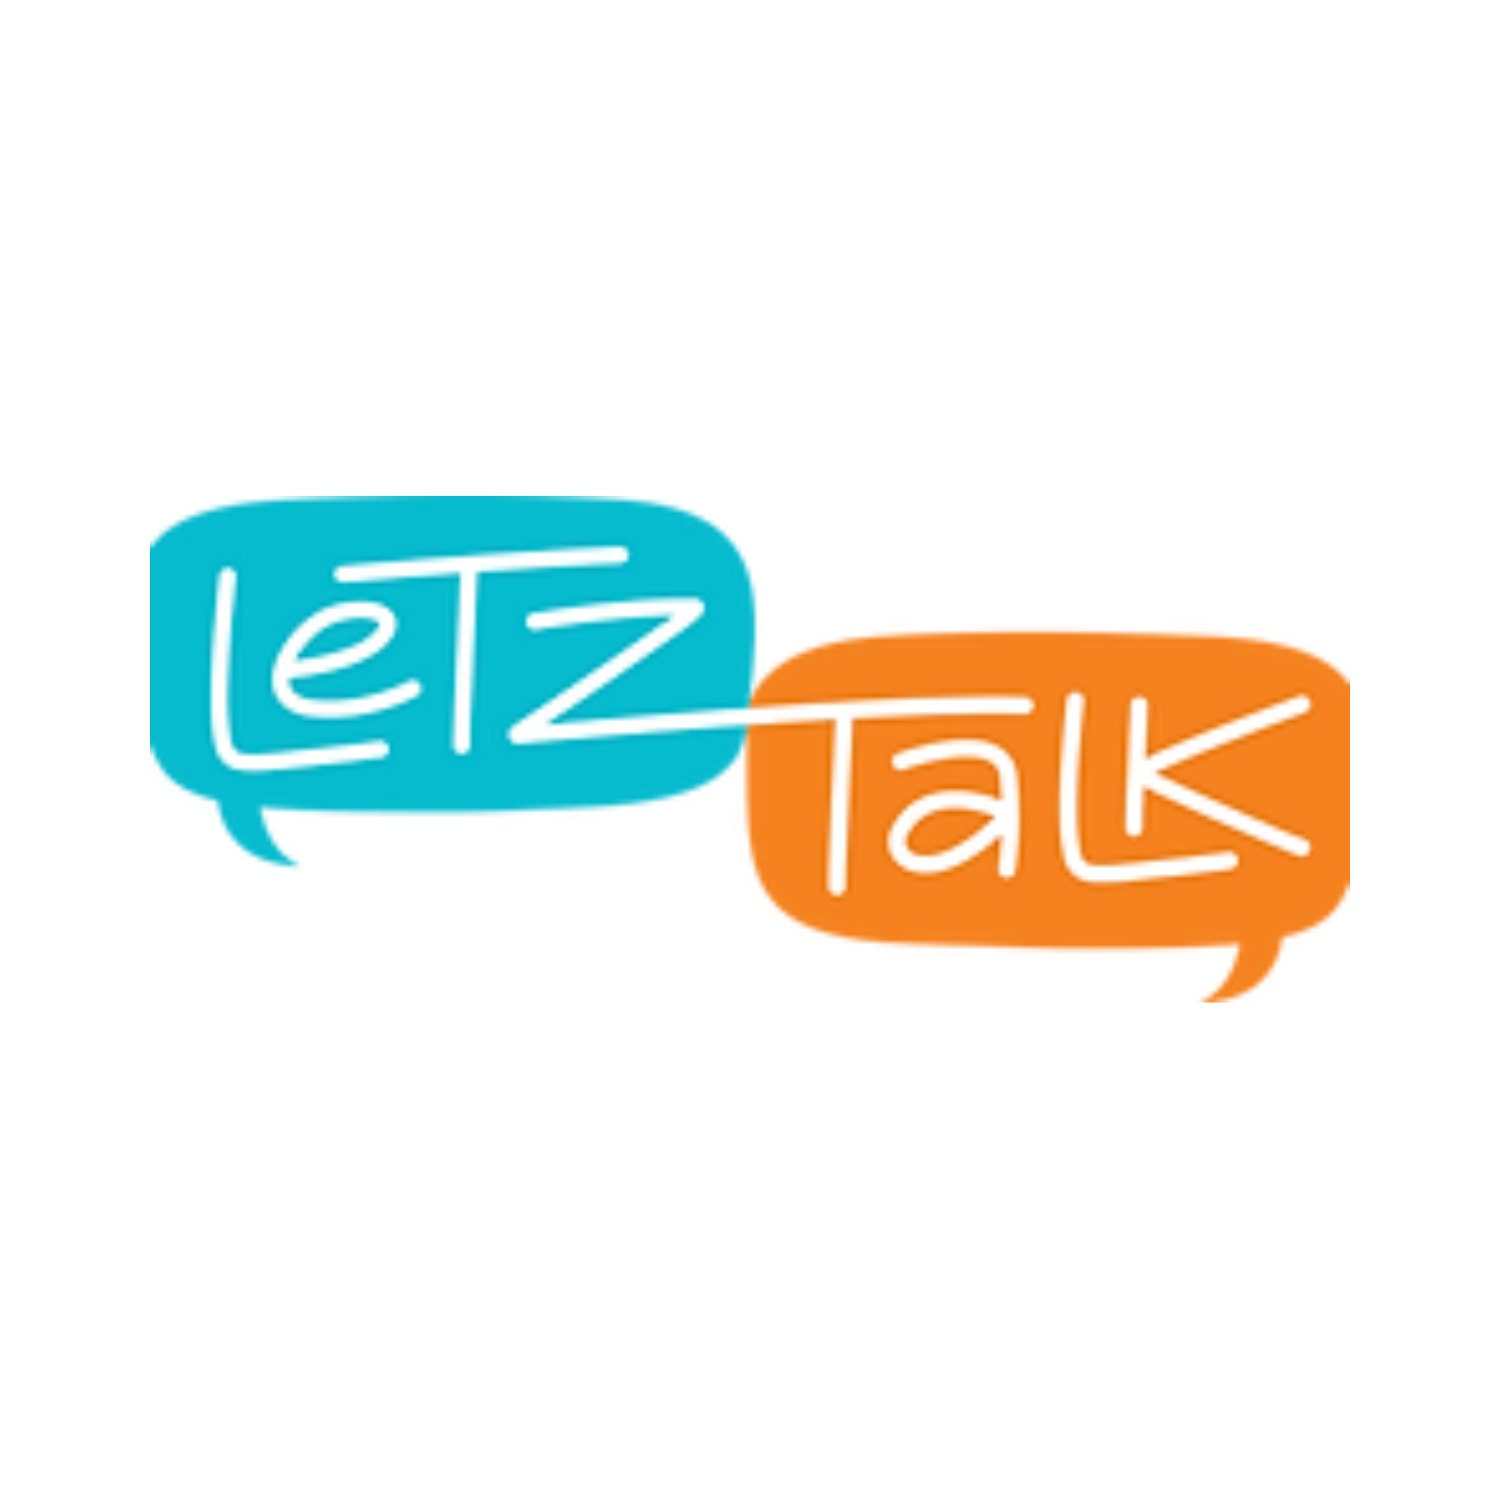  Letz Talk Communication Cards for Kids - Conversation Cards to  Build Confidence & Emotional Intelligence, Family Games for Kids & Adults,  Family Game Night - Stocking Stuffers - Ages (5-8) : CDs & Vinyl